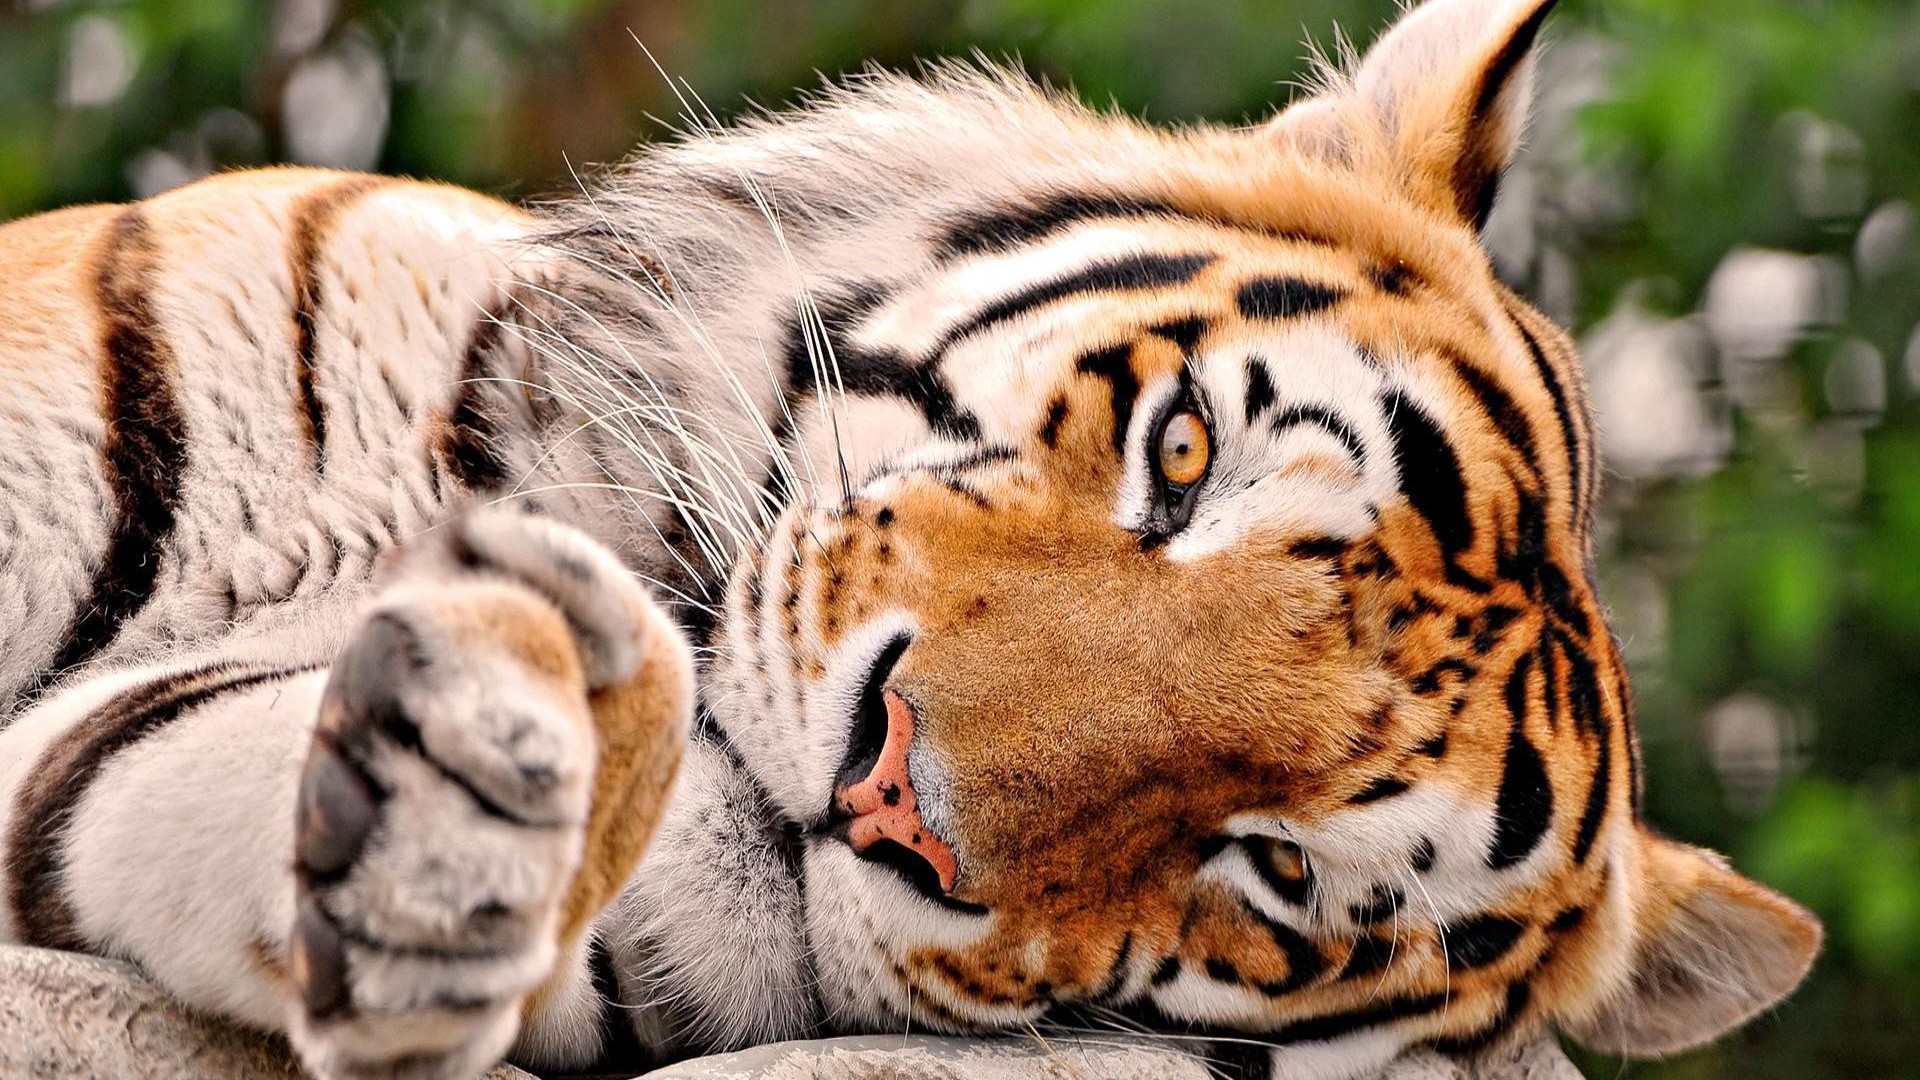 Cute Tiger Wallpaper Widescreen Is High Definition You Can